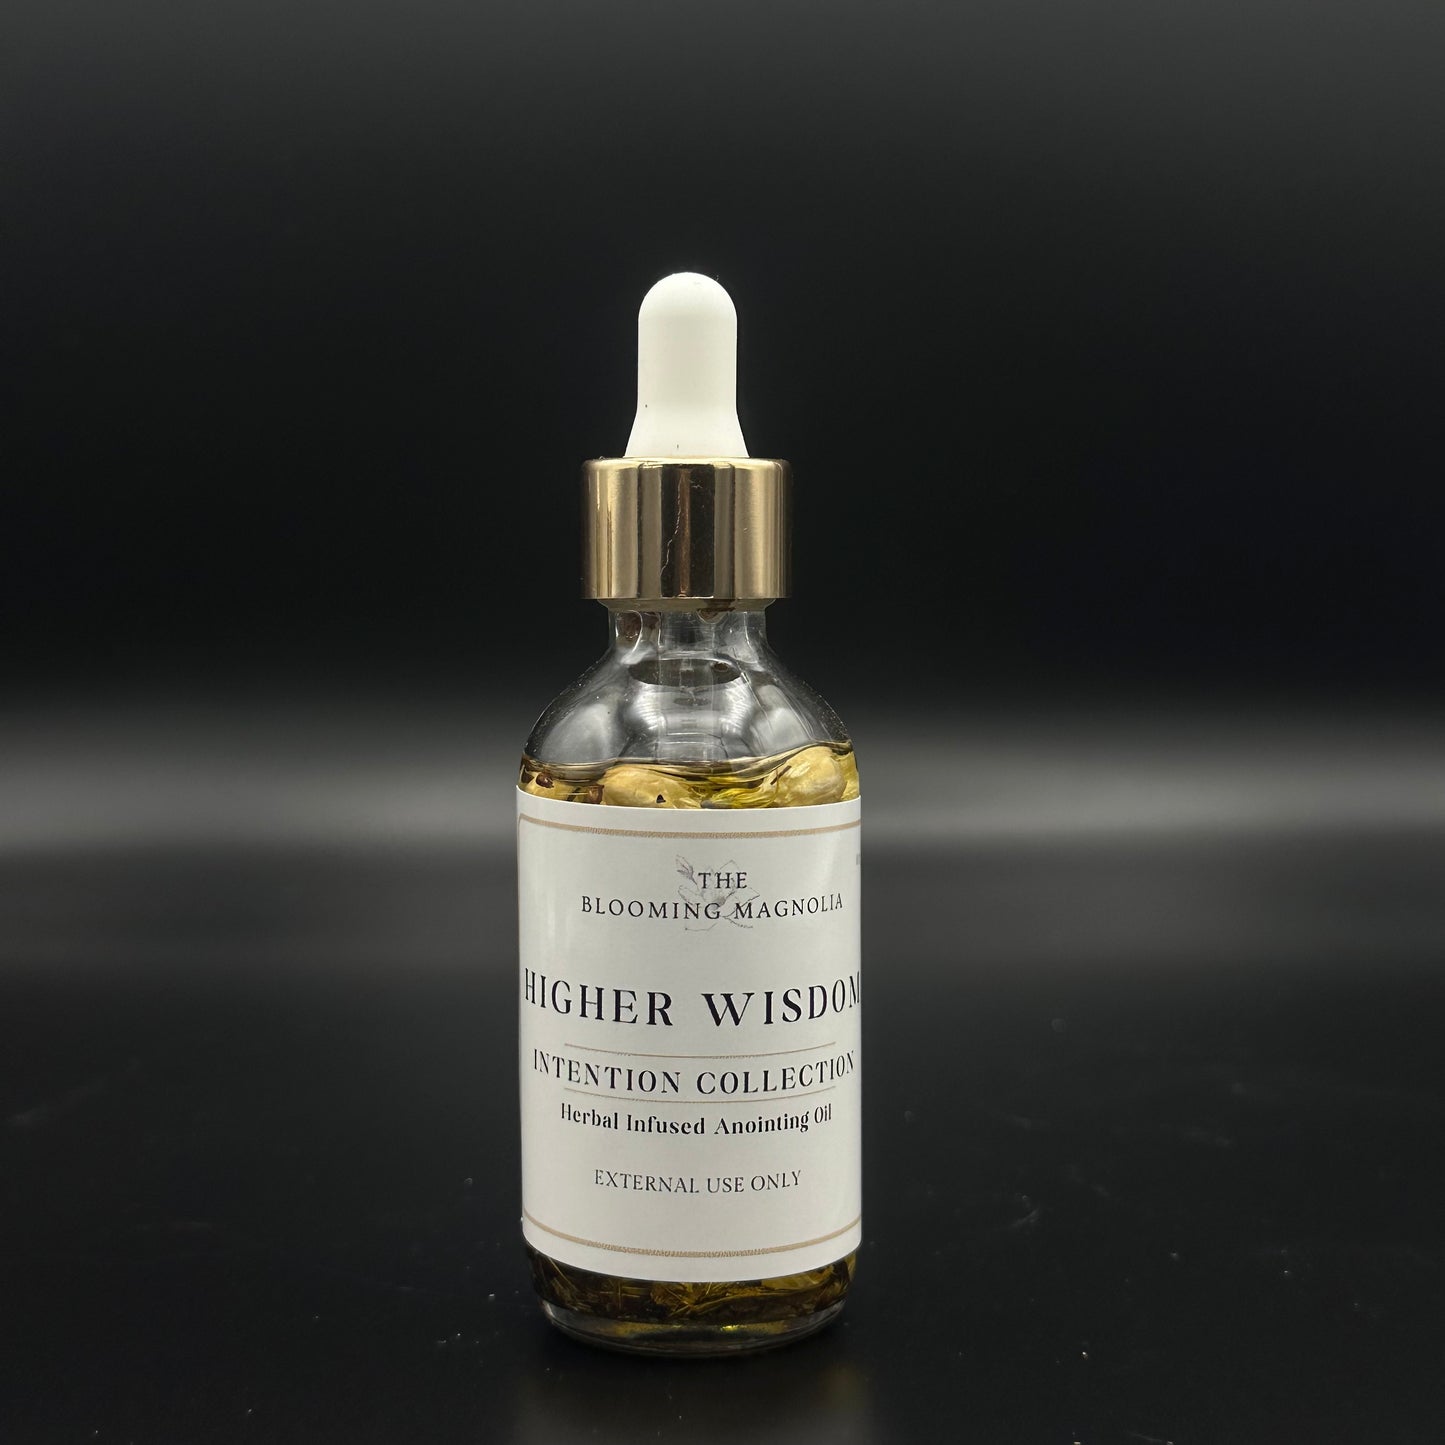 Higher Wisdom Anointing Oil